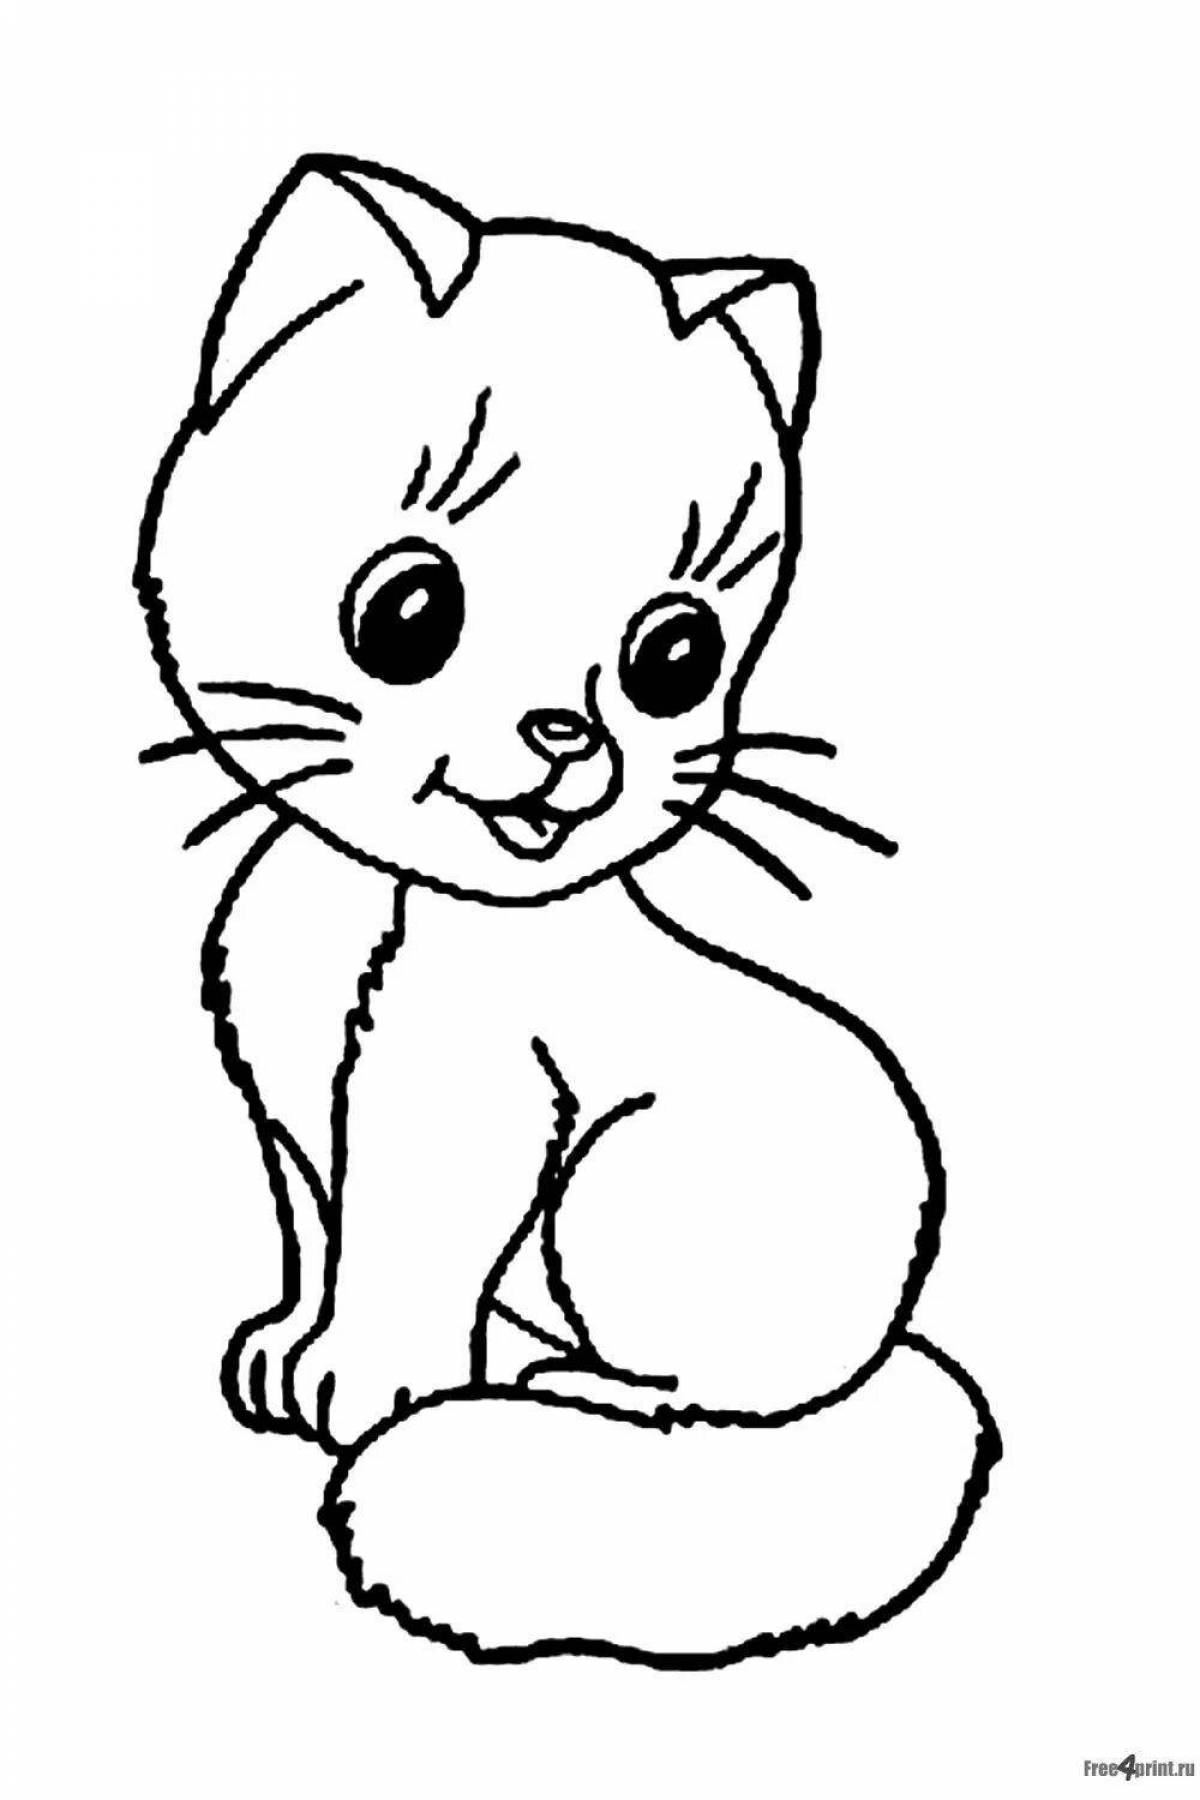 Kitty magic coloring book for 2-3 year olds